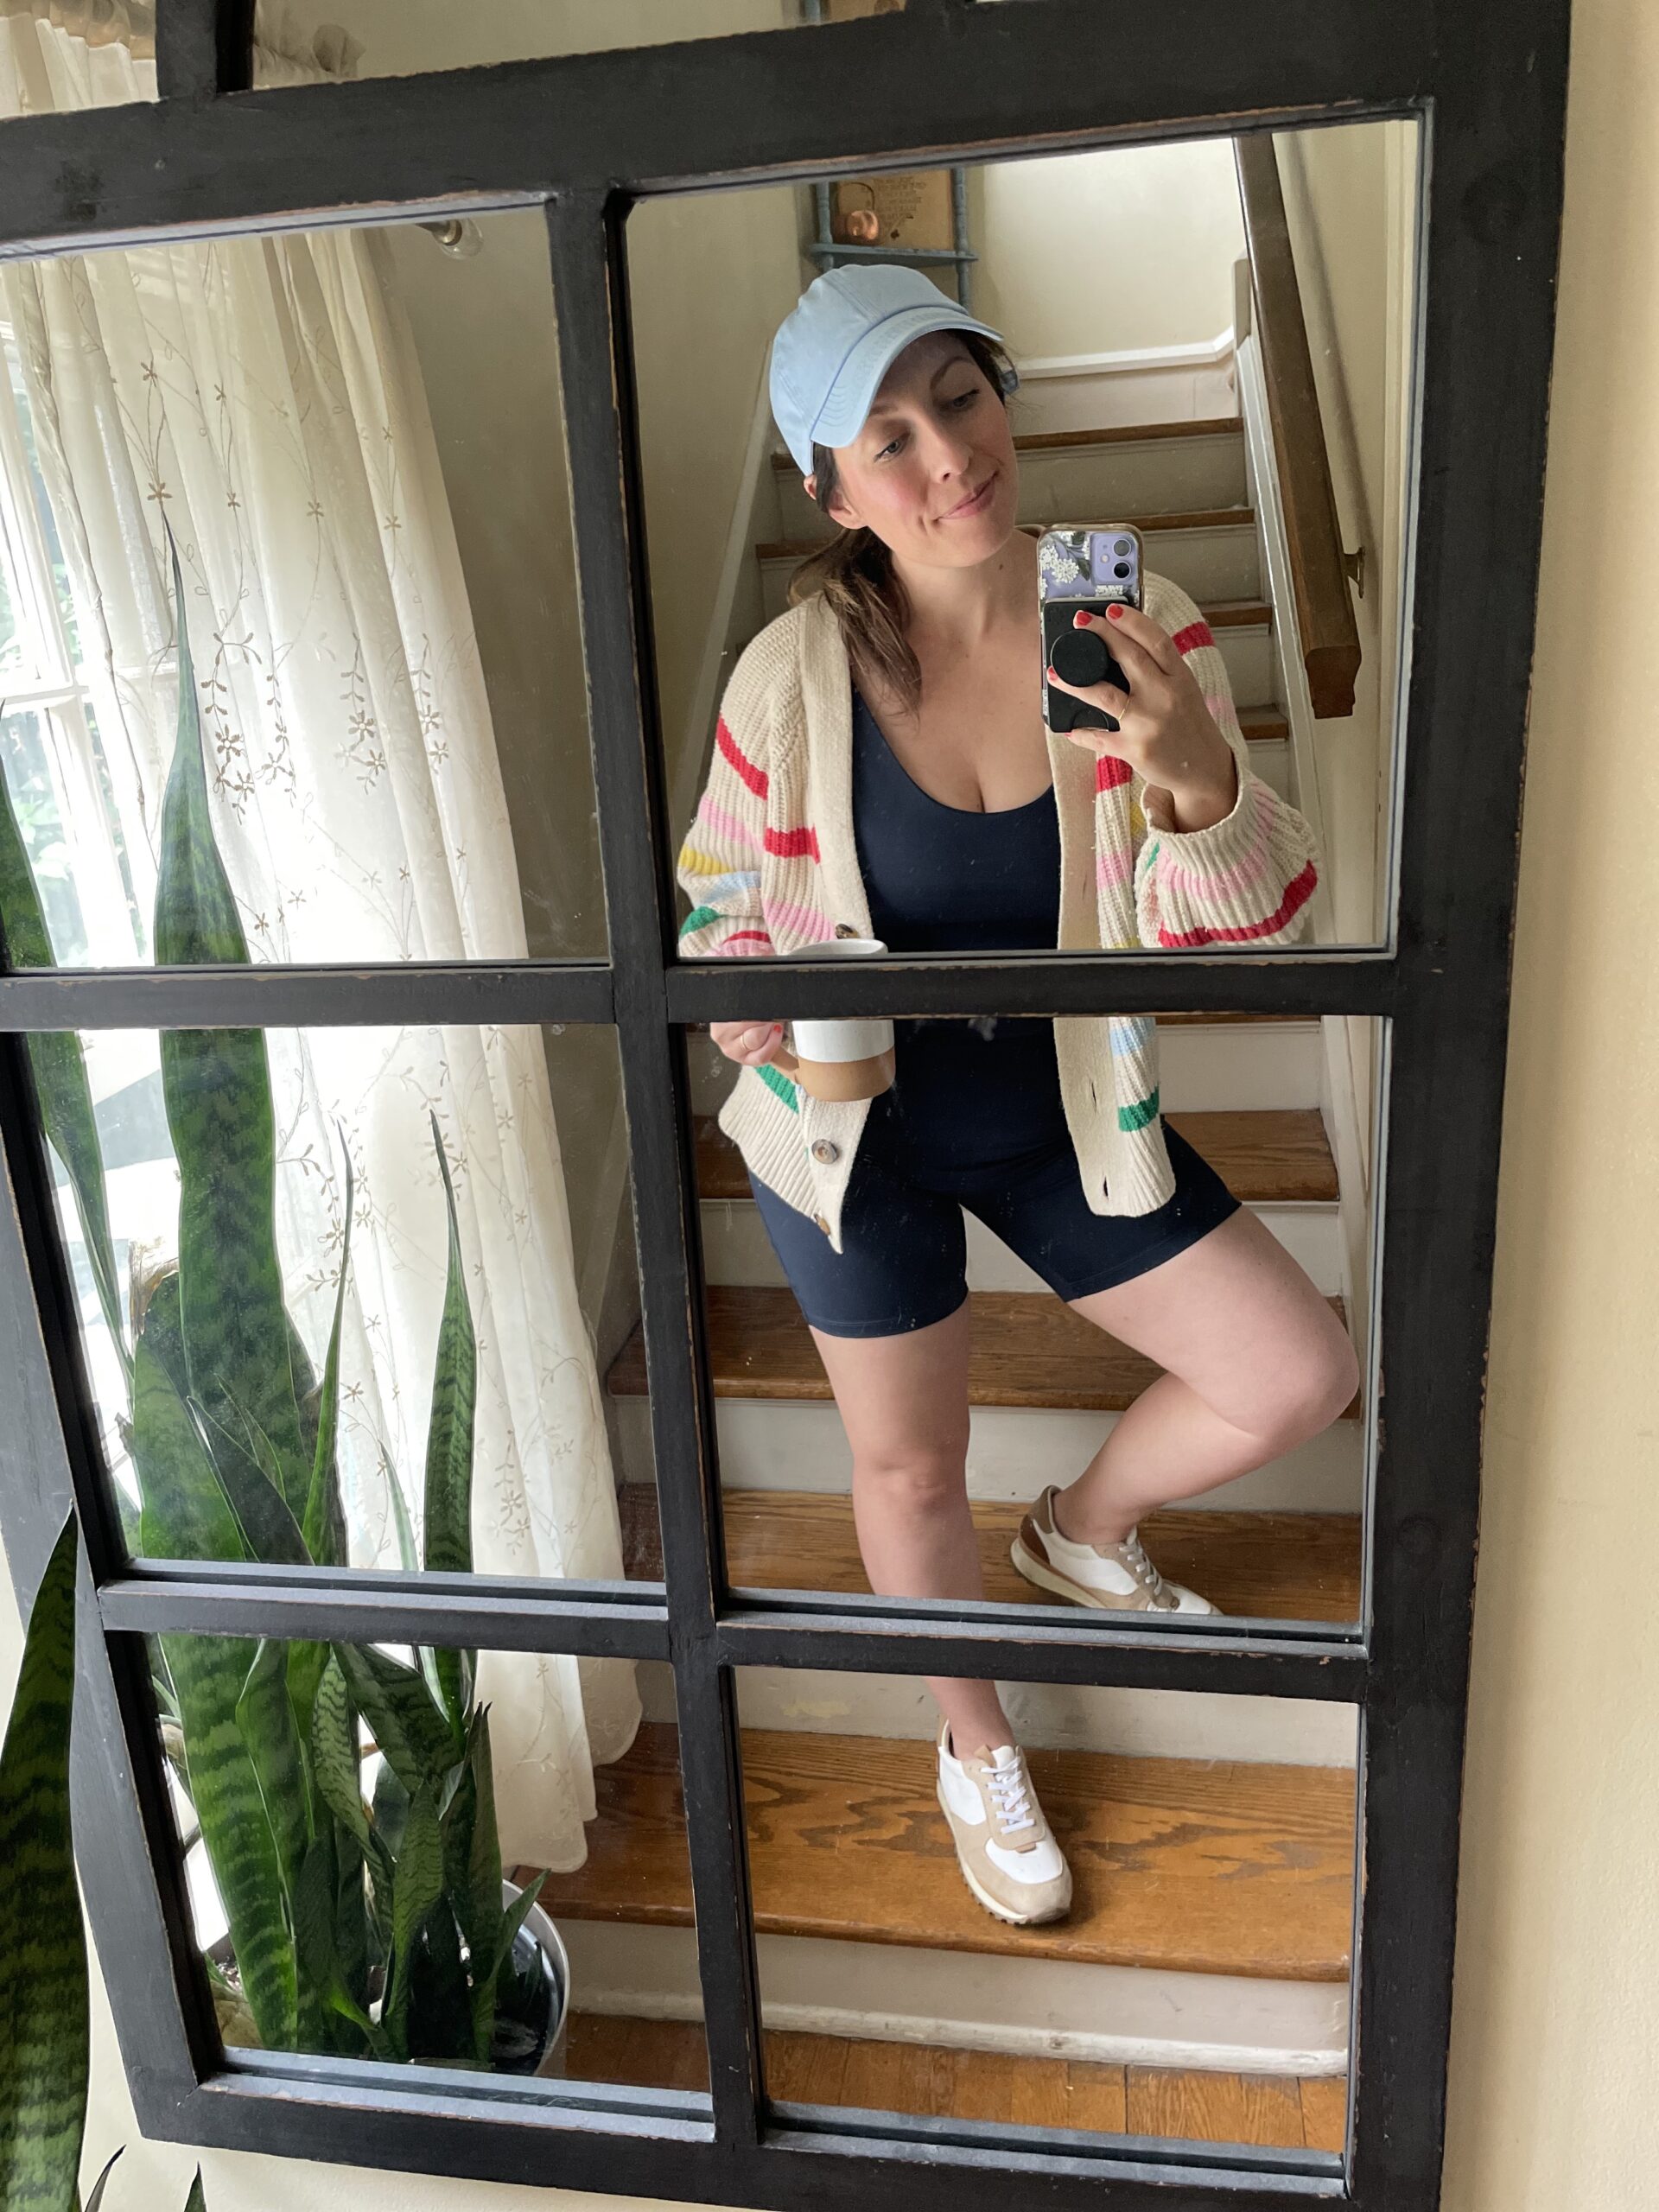 A woman holding a coffee mug takes a photo of herself in a mirror with her phone: she's wearing white and tan sneakers, a unitard, a striped cardigan, and a blue baseball hat.